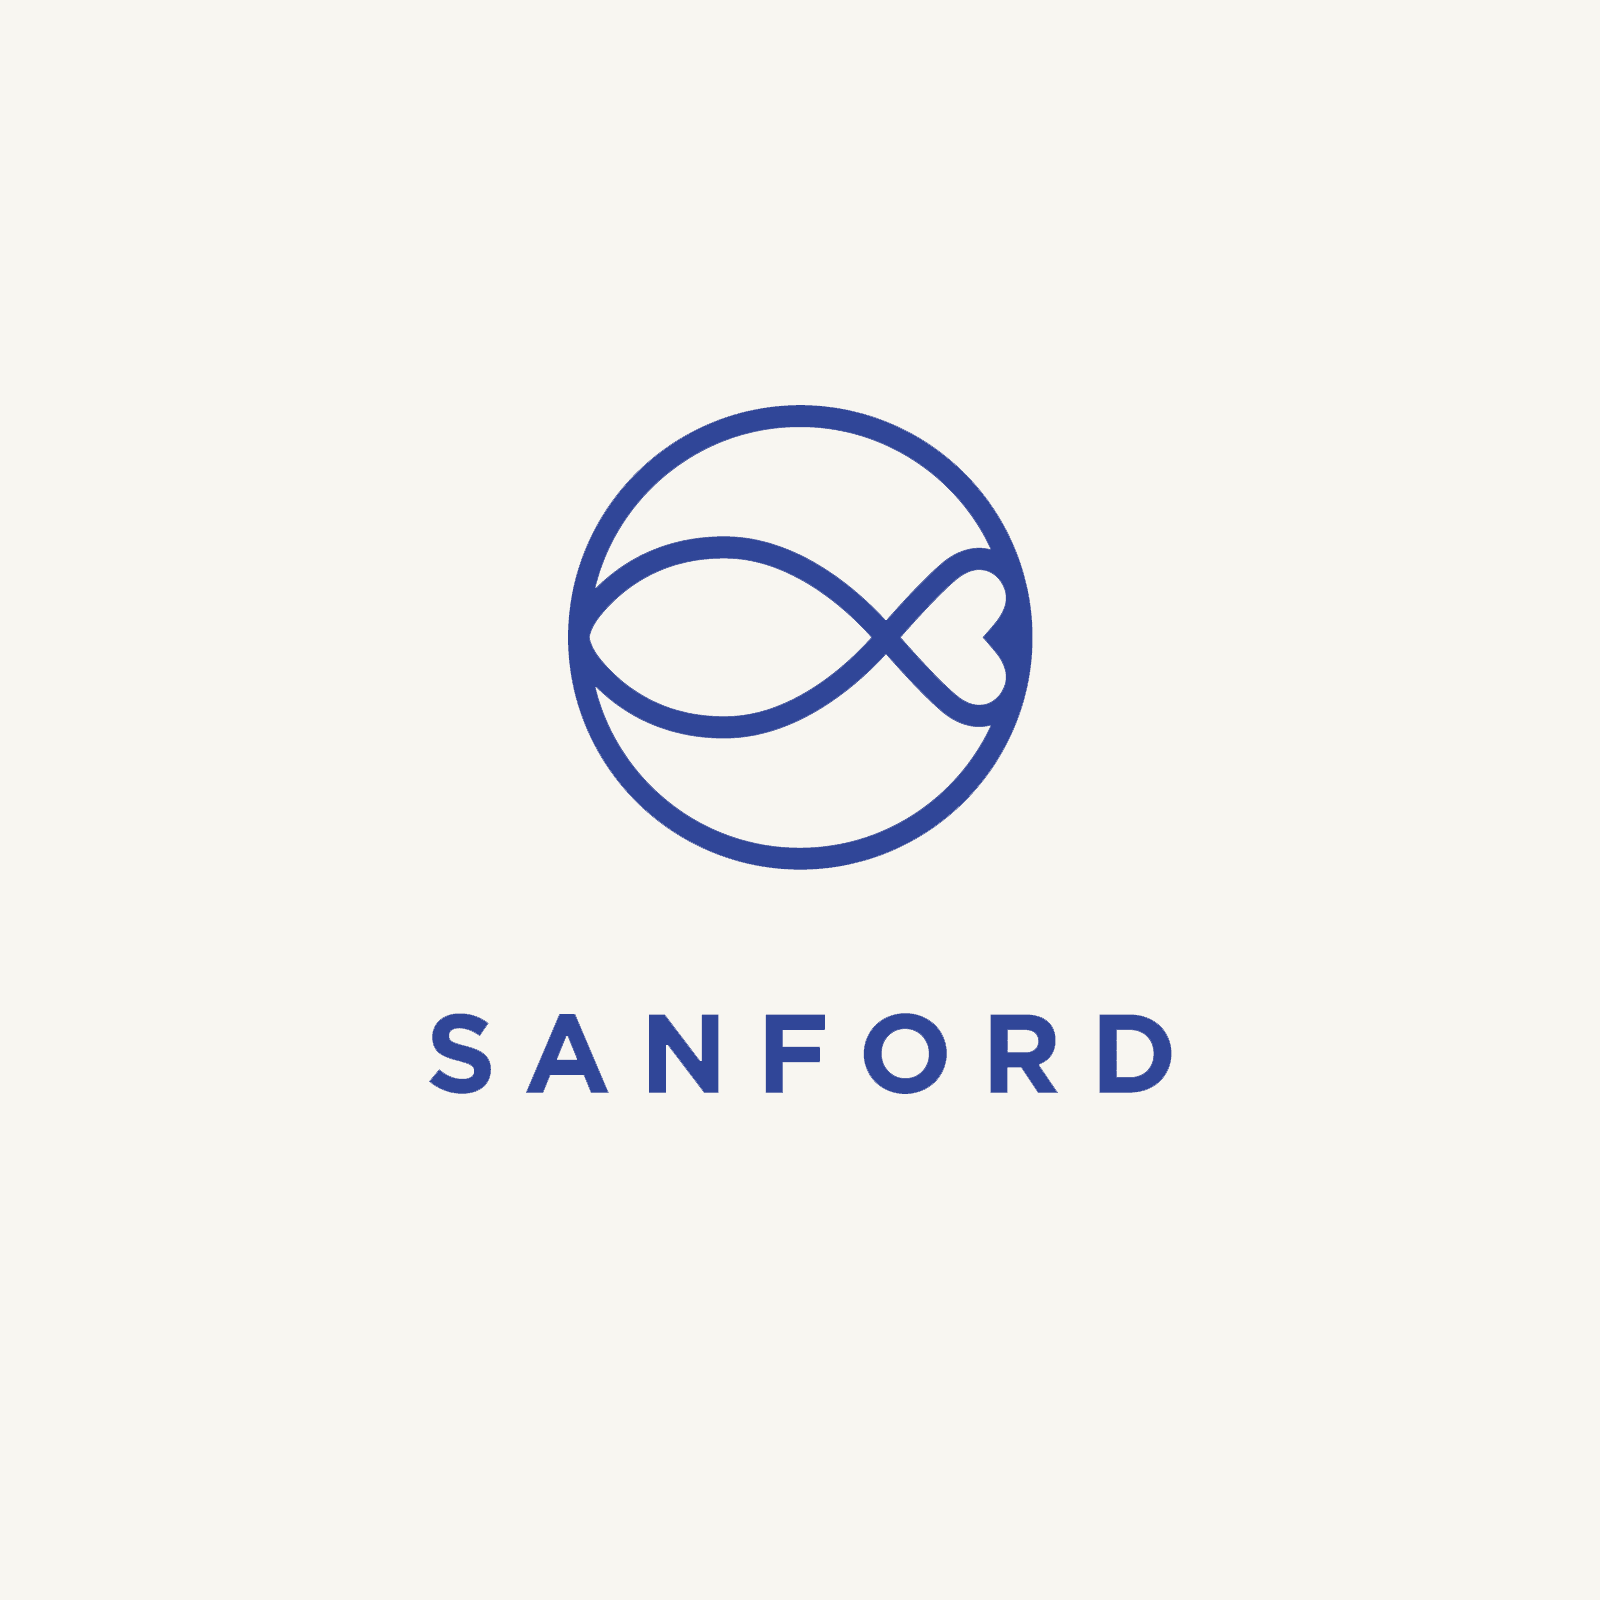 Angela Boaler appointed as Site Manager at Sanford